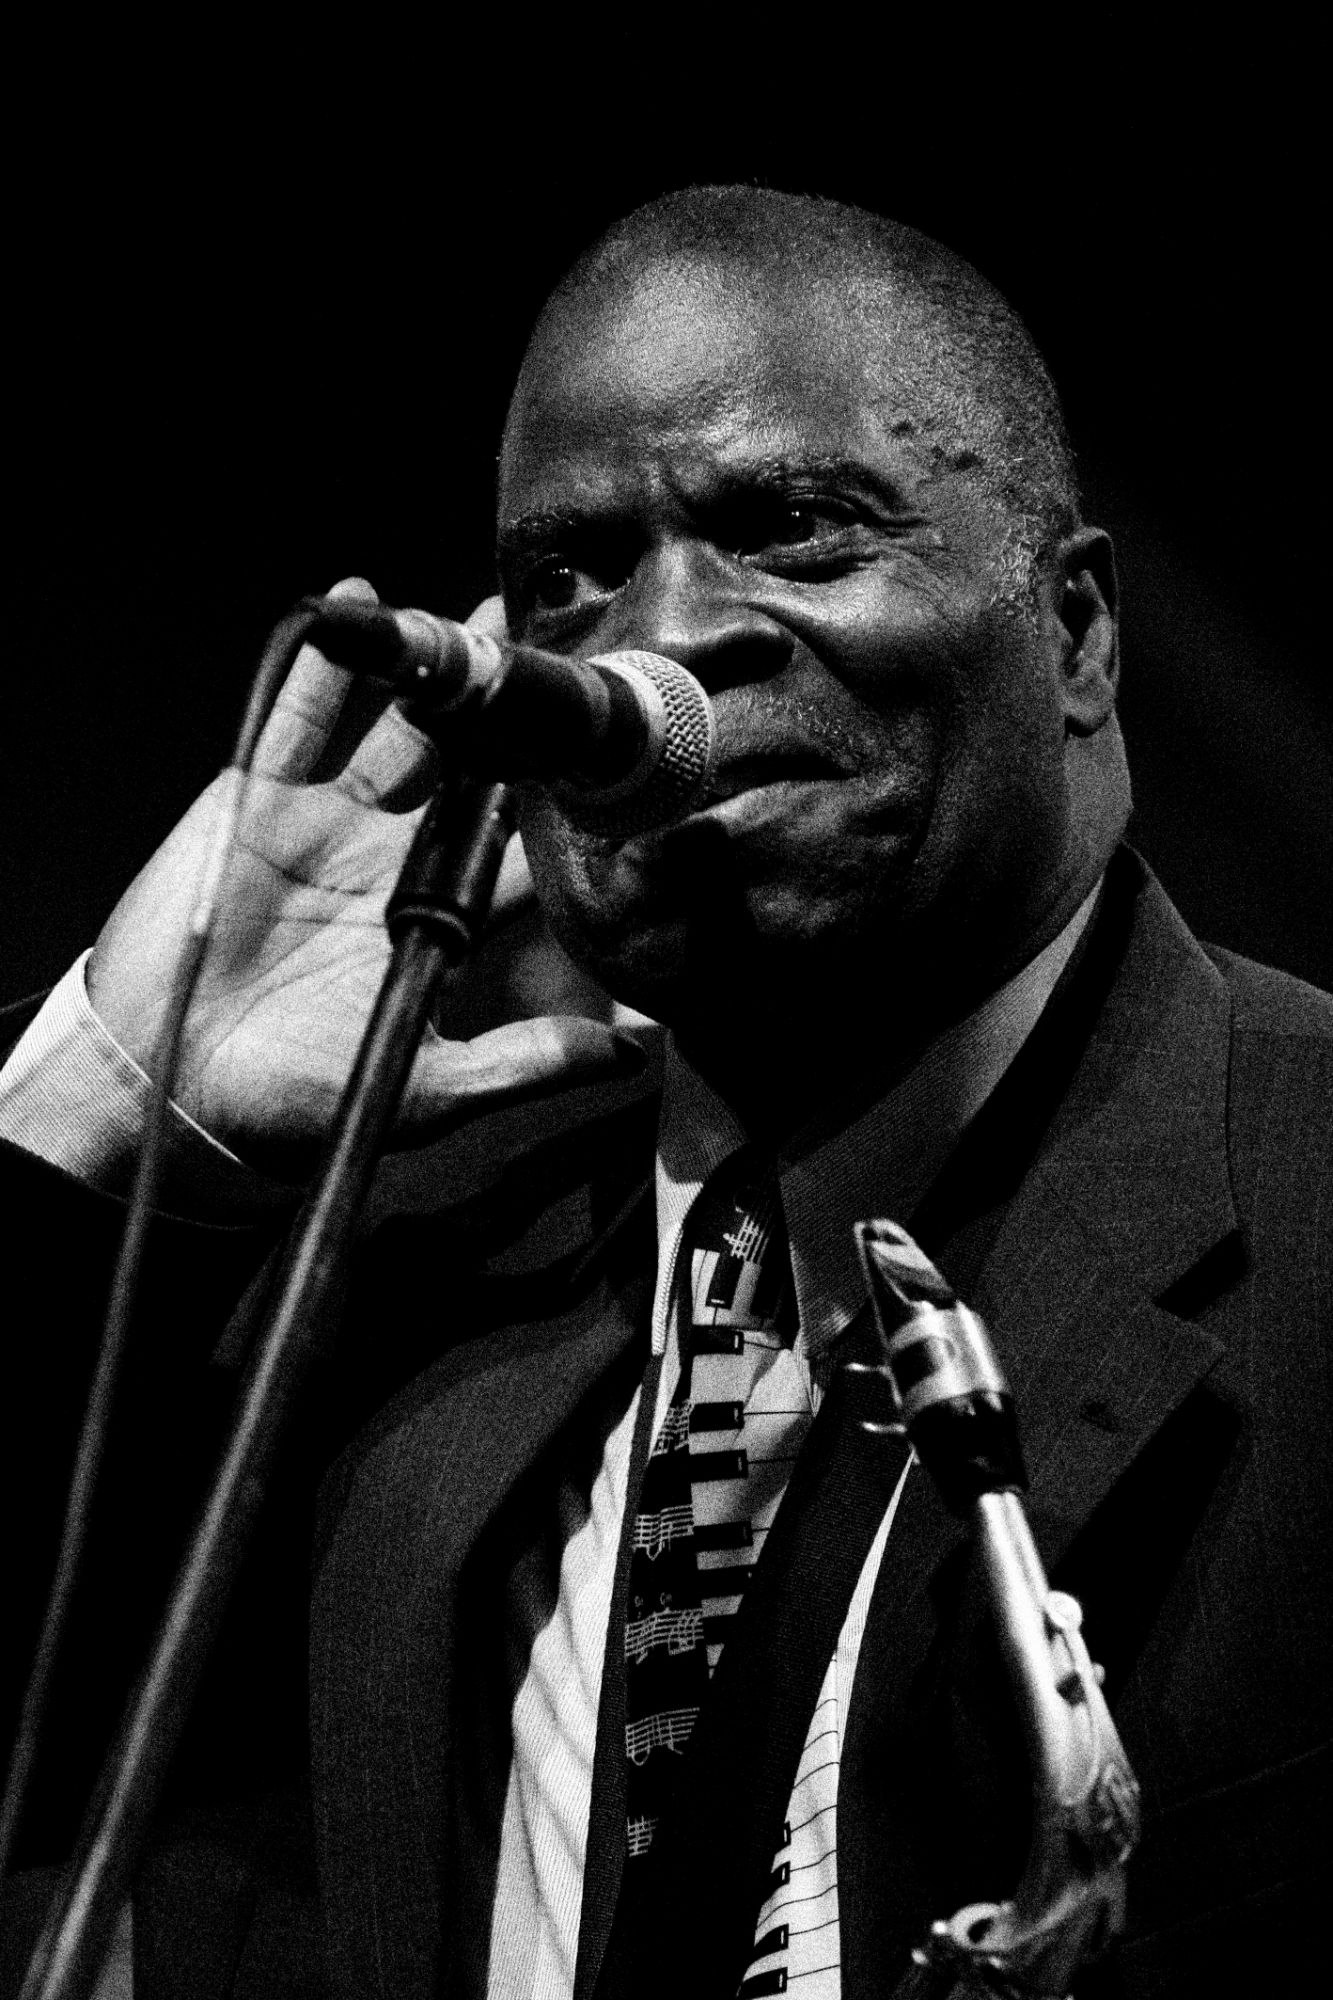 Black and white photo of Maceo Parker performing at Sziget festival